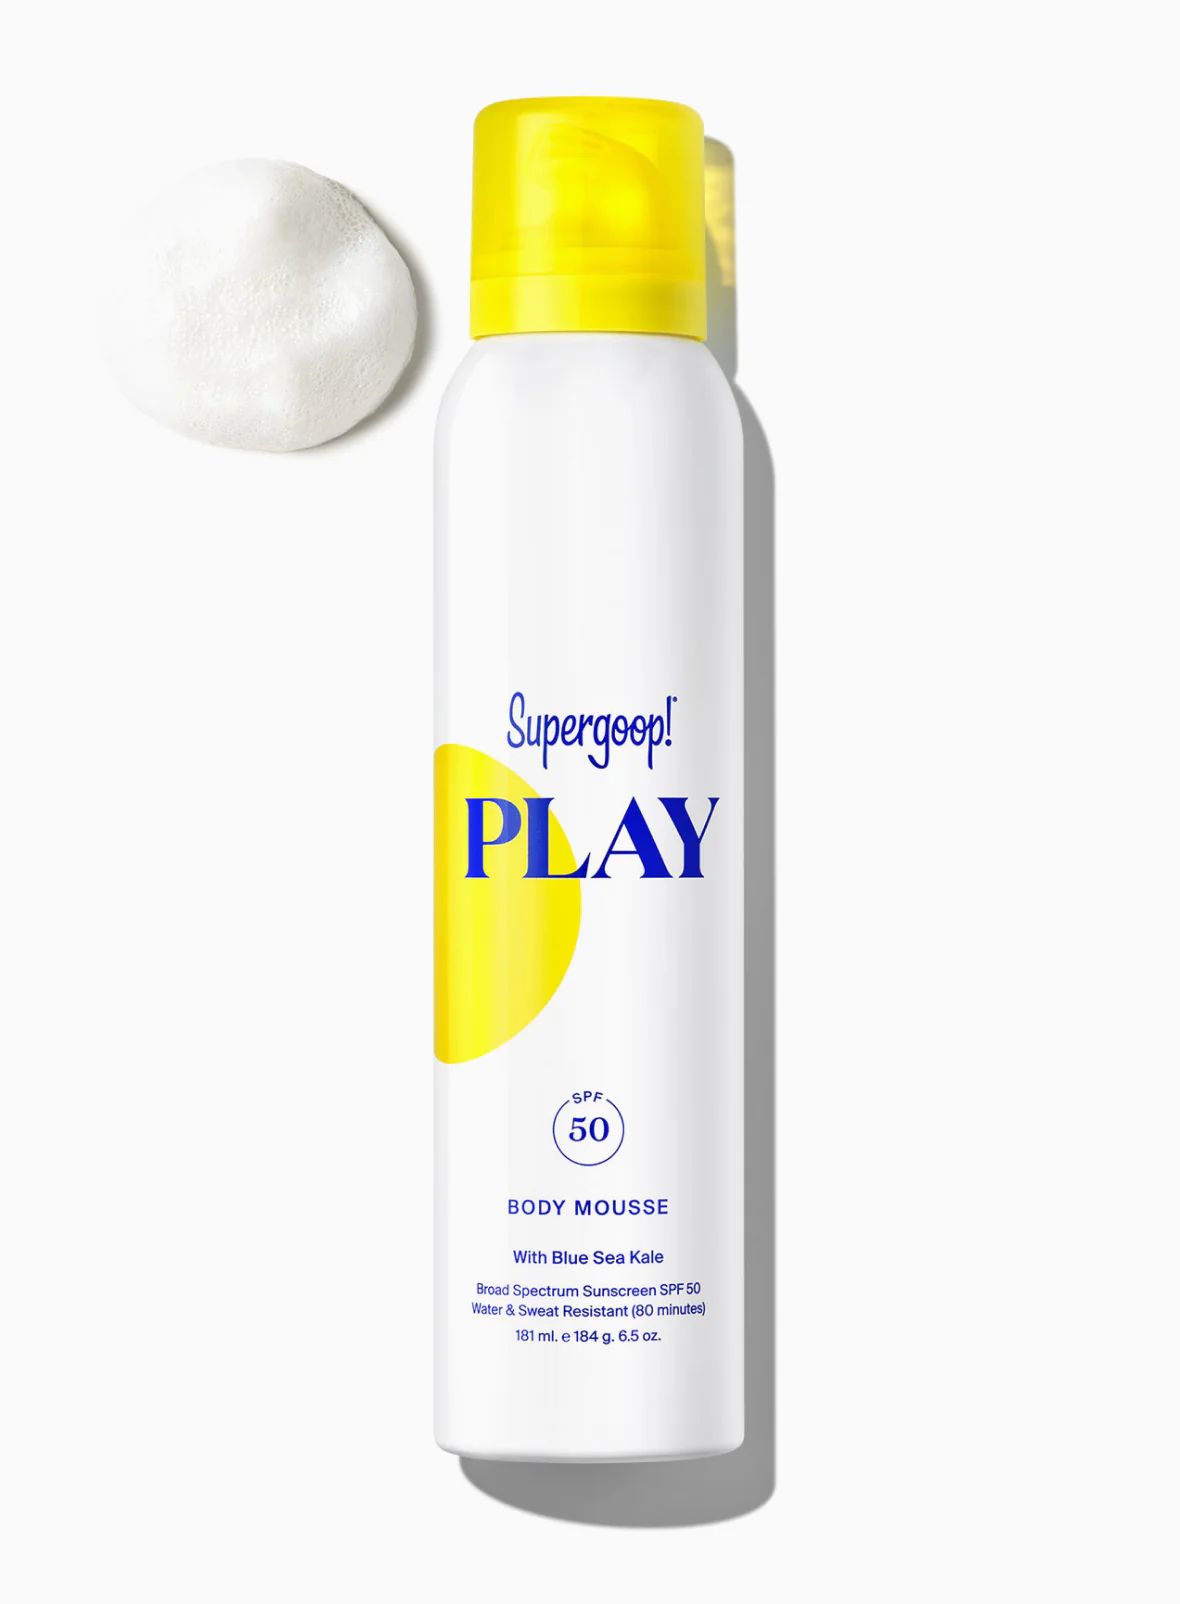 PLAY Body Mousse SPF 50 | Supergoop